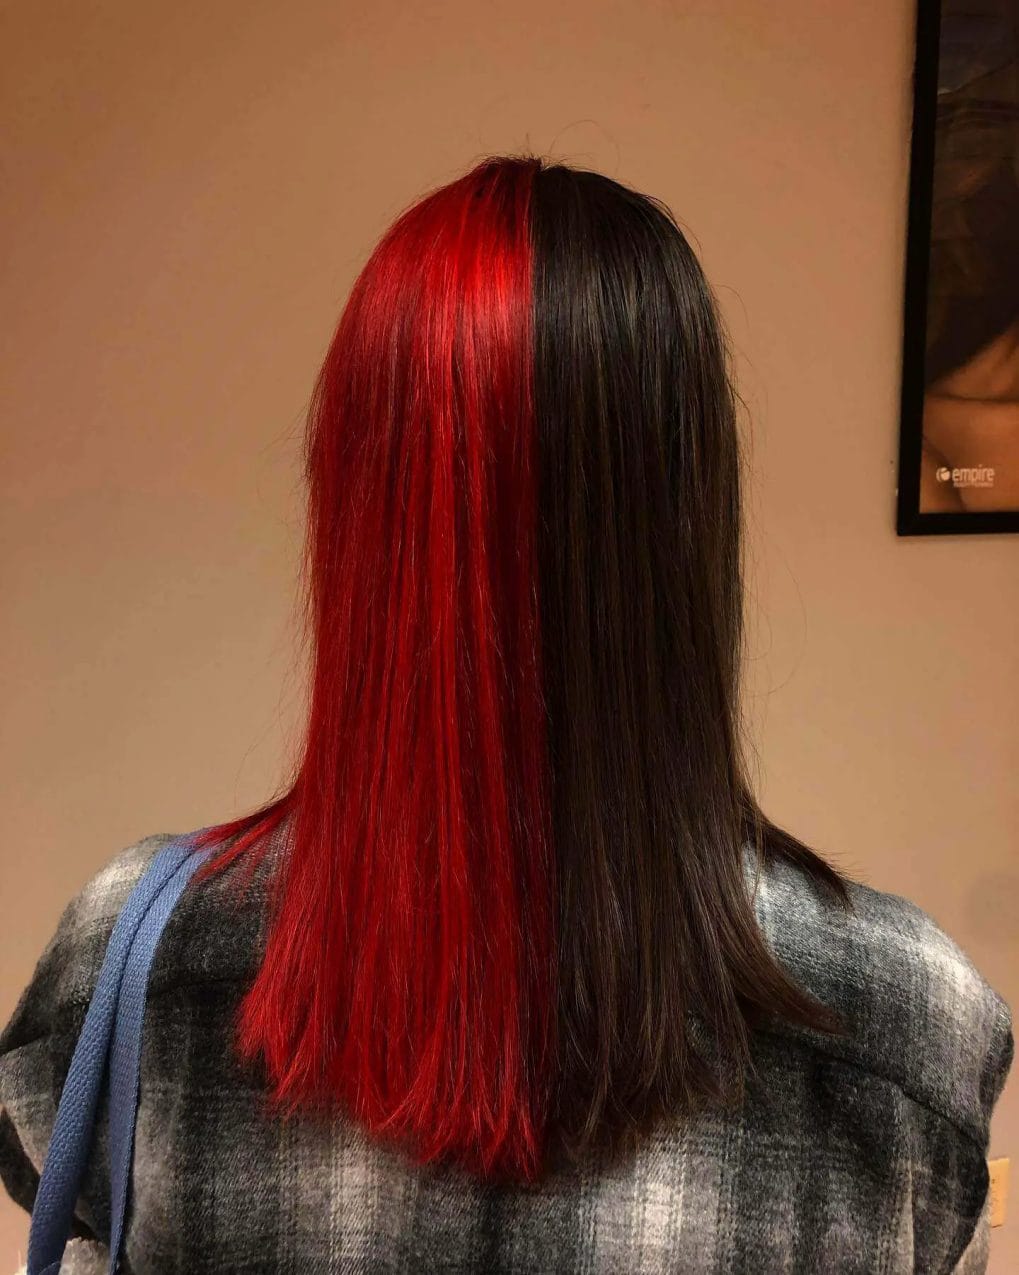 Radiant ruby red and natural dark split dye in mid-length style.